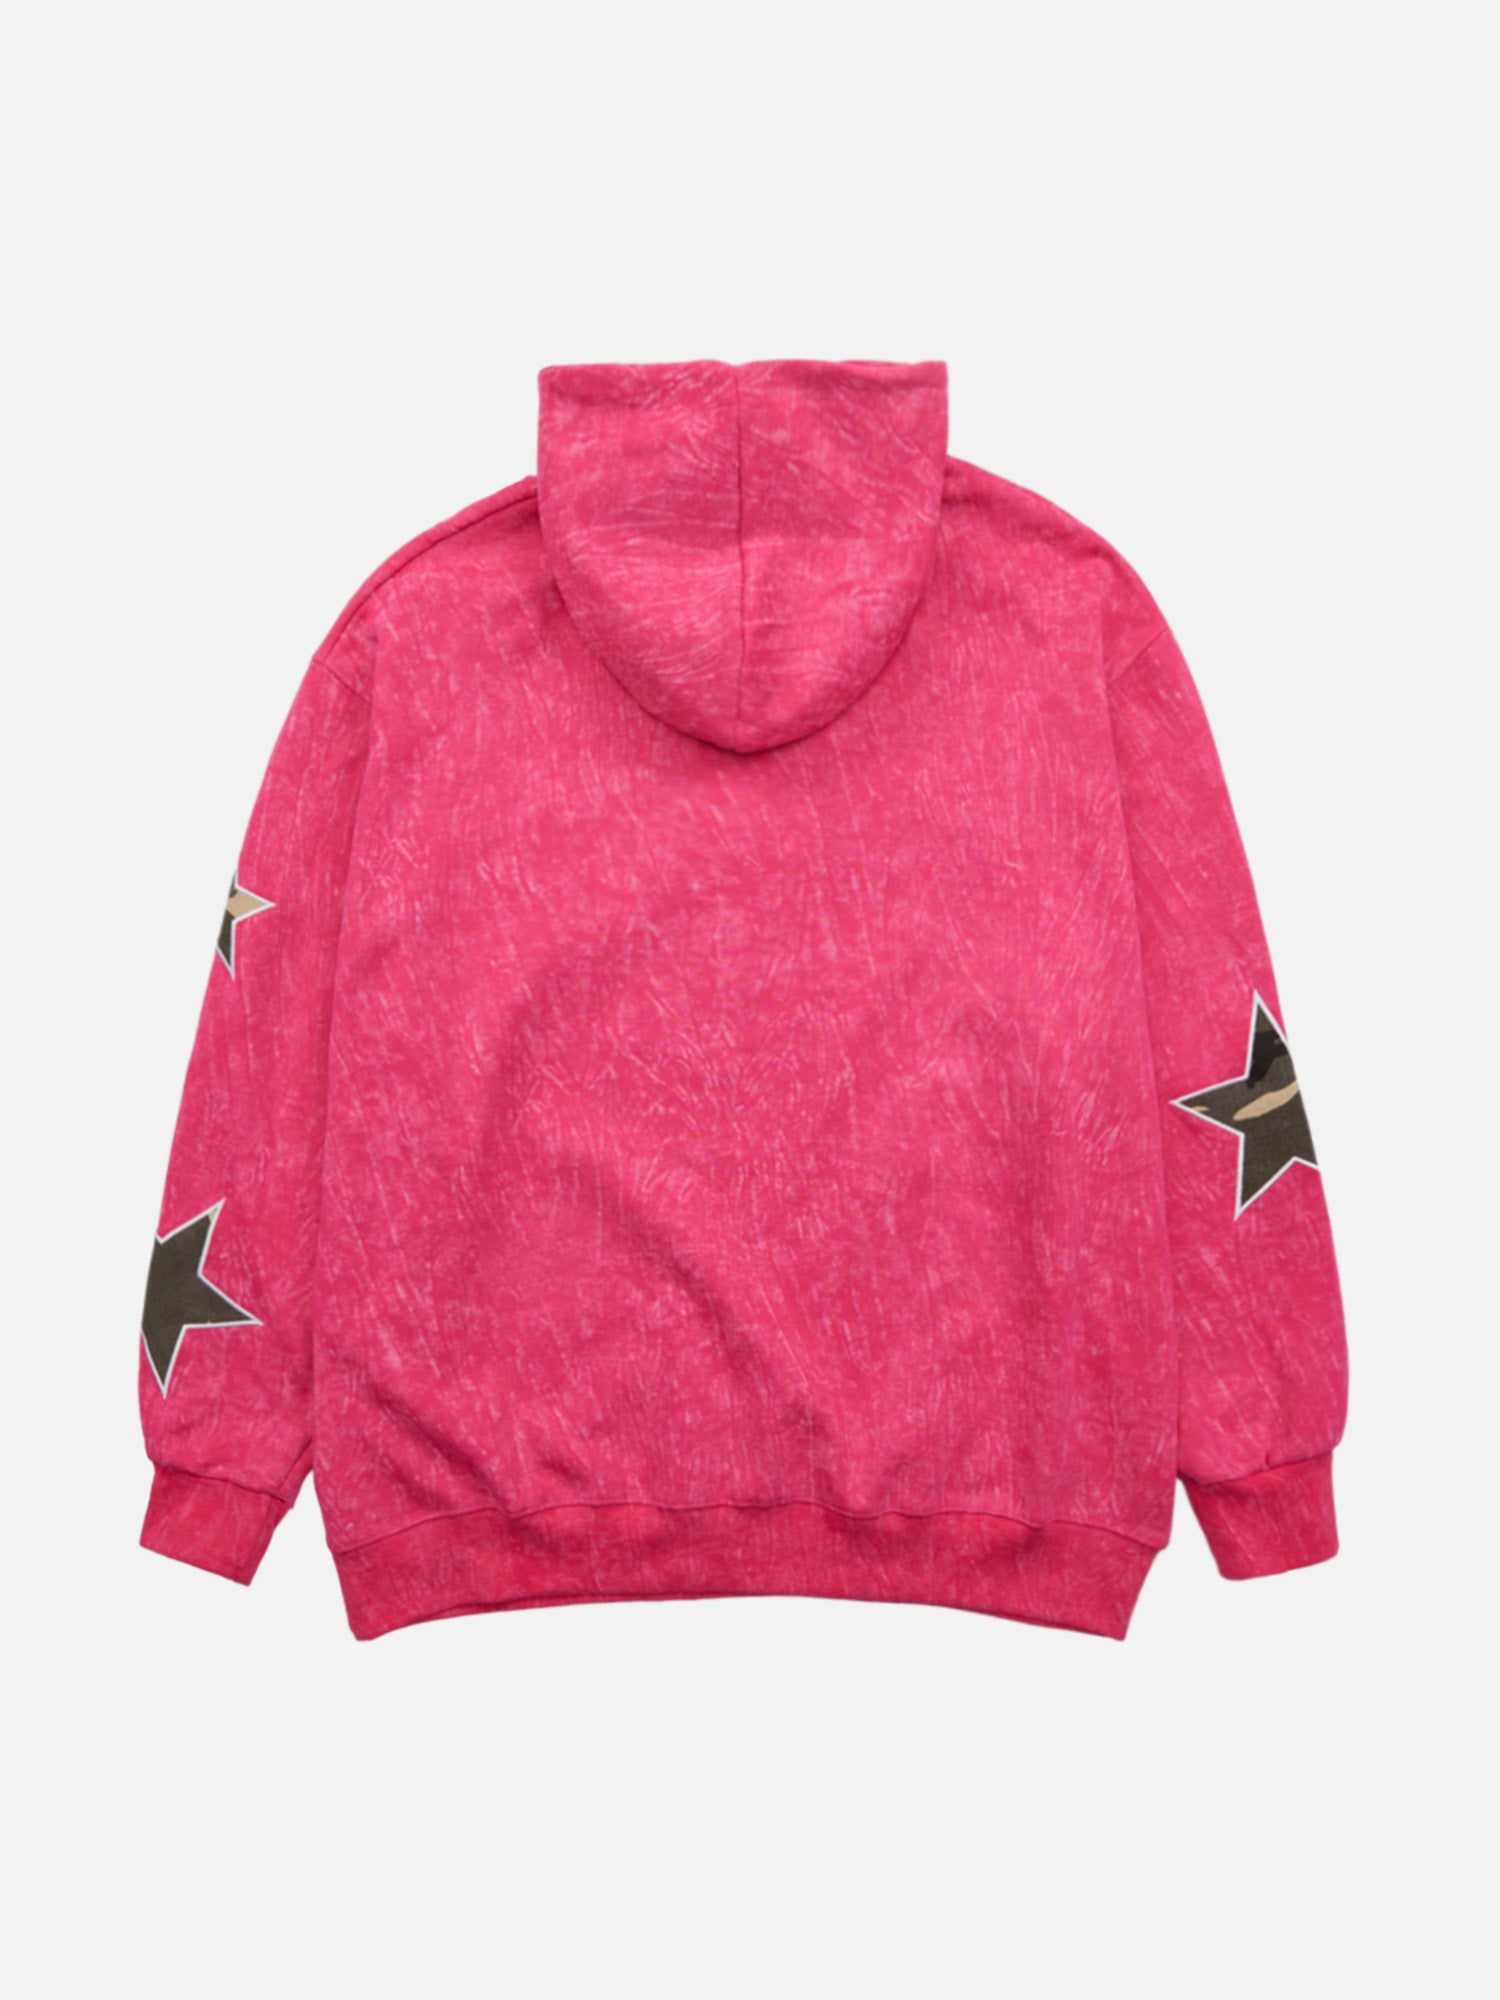 Thesupermade American Retro Patch Star Hooded Sweatshirt - 1969